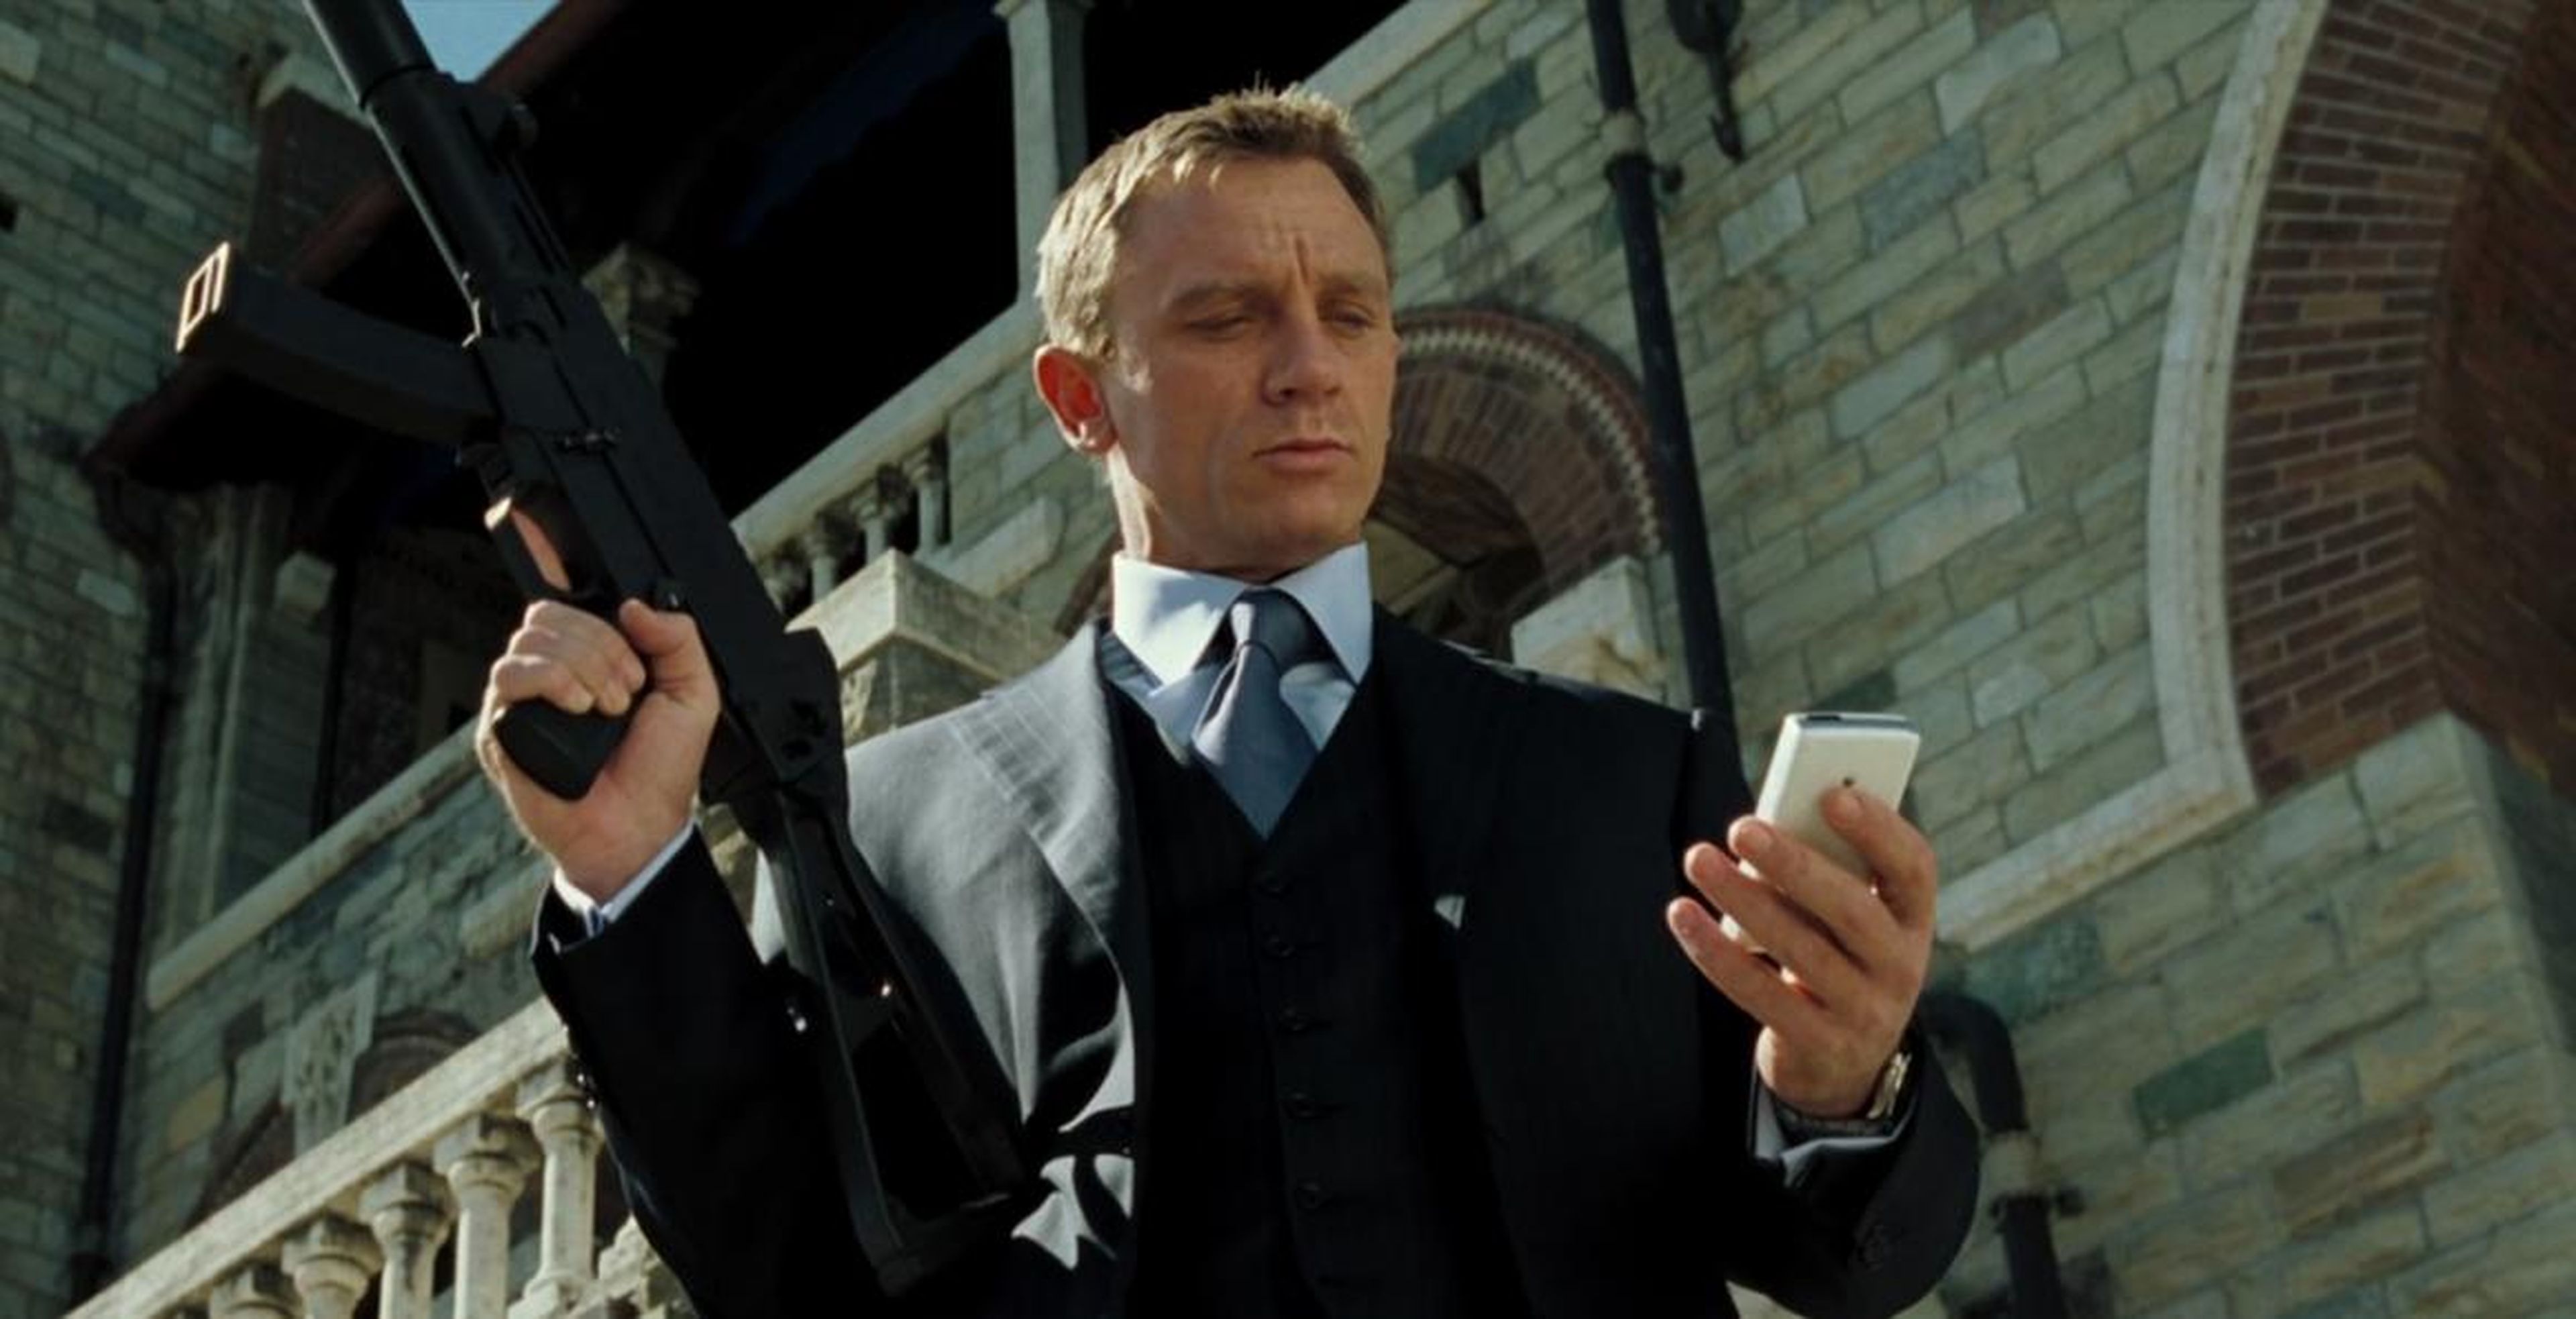 Producer Barbara Broccoli said that Bond isn't on active duty at the start of the movie, and is hanging out in Jamaica.